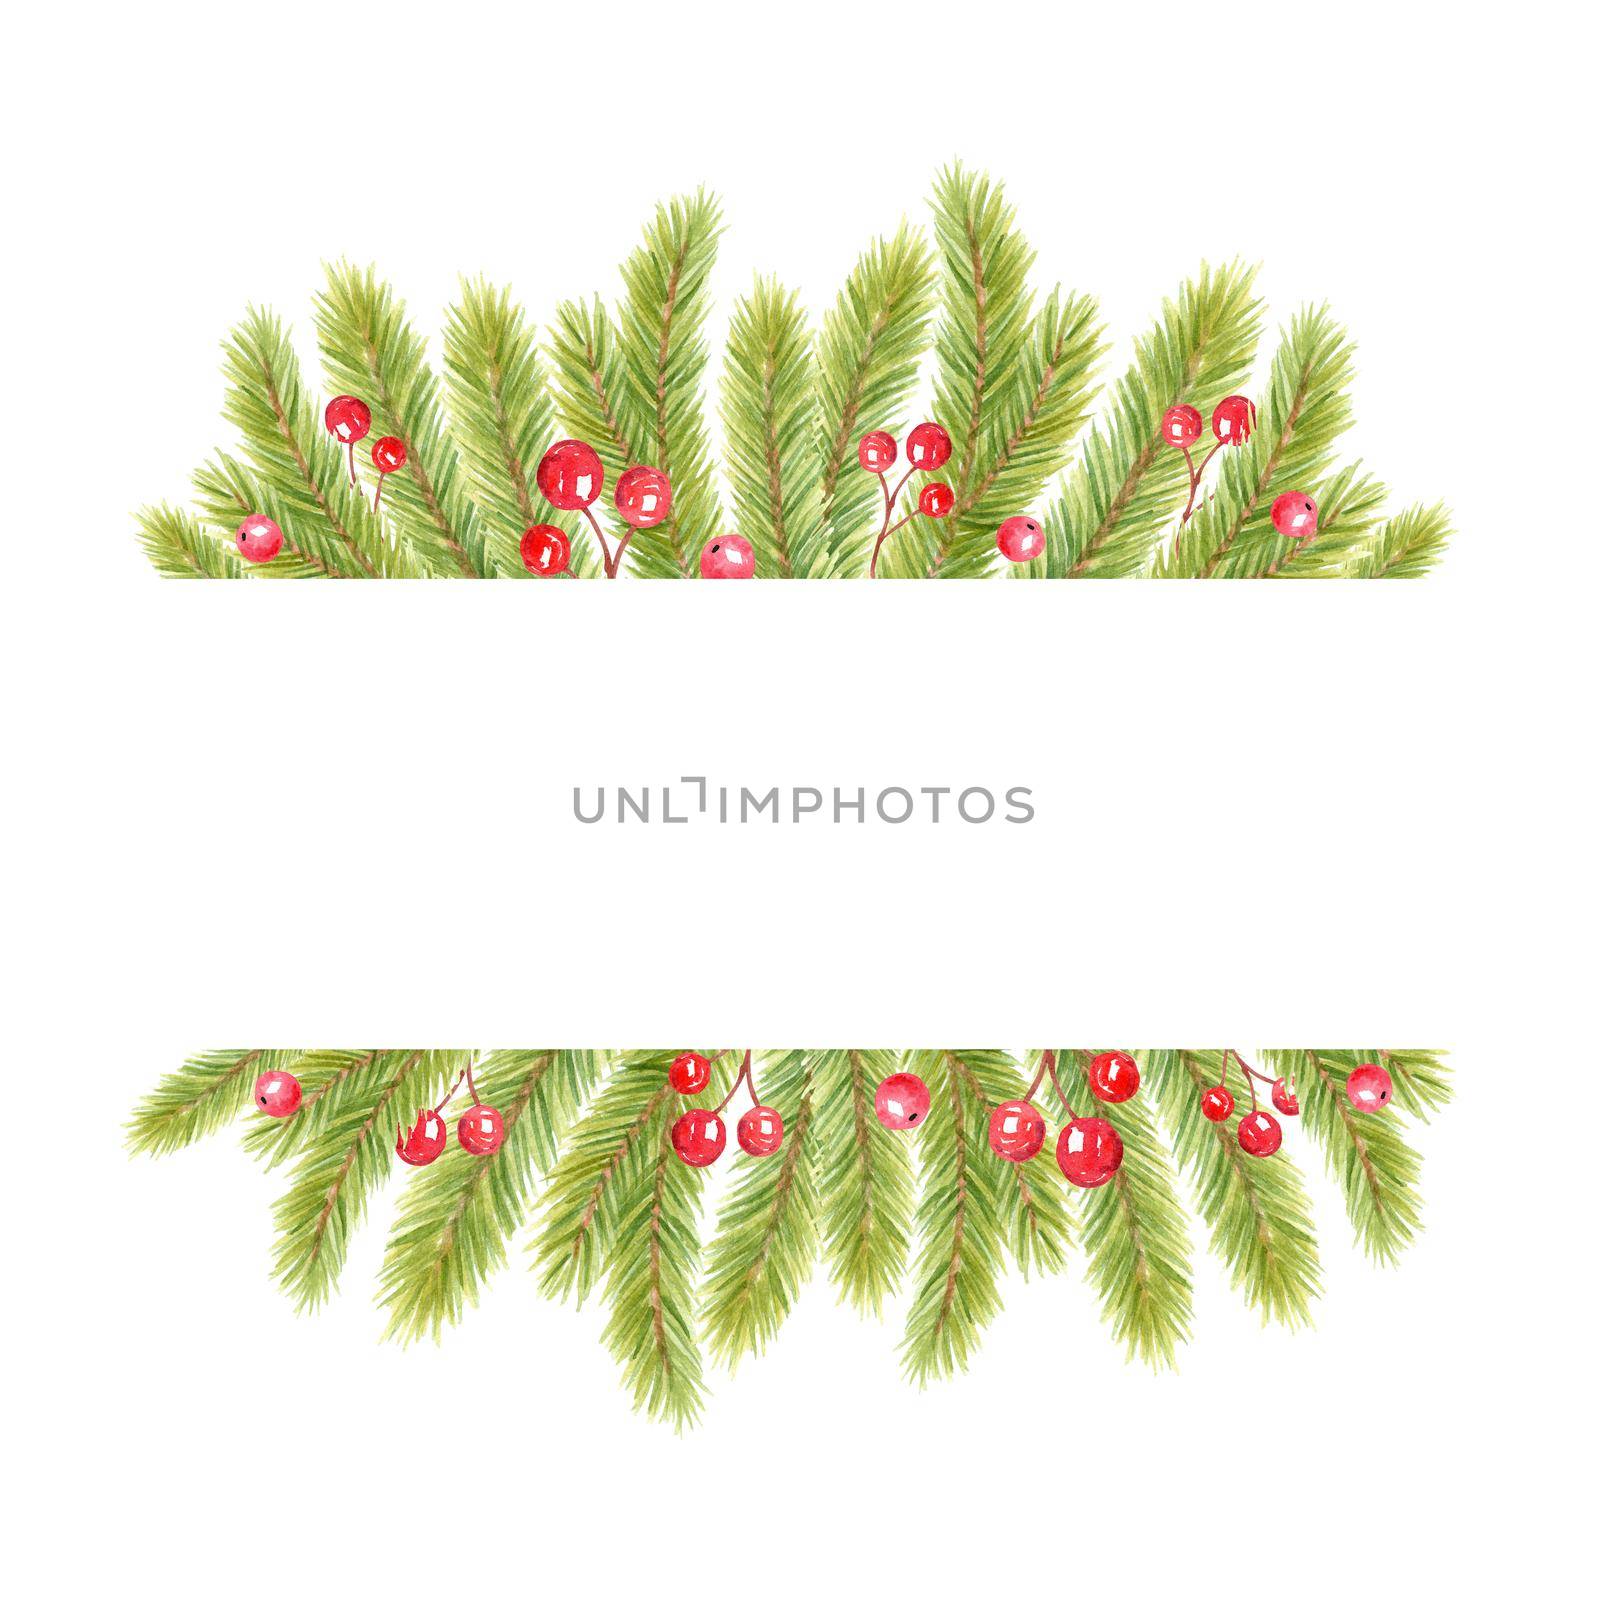 watercolor fir border with holly berries isolated on white by dreamloud